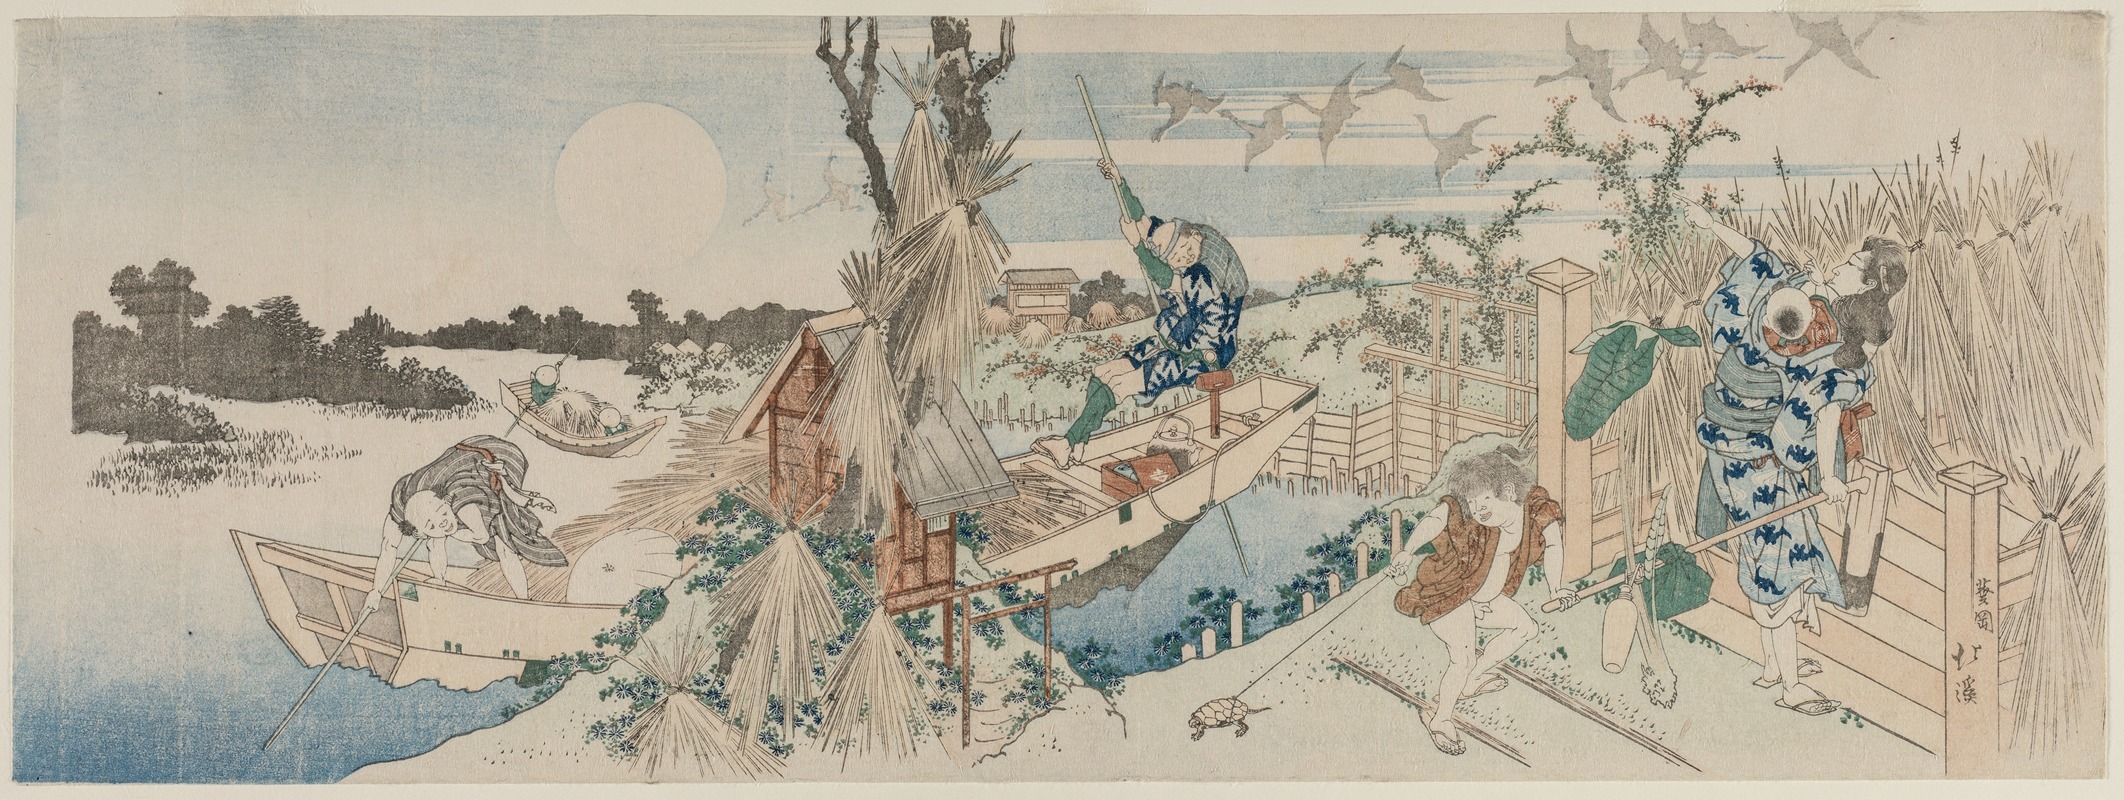 Totoya Hokkei - Landscape with Ferry Boat, Geese and Full Moon